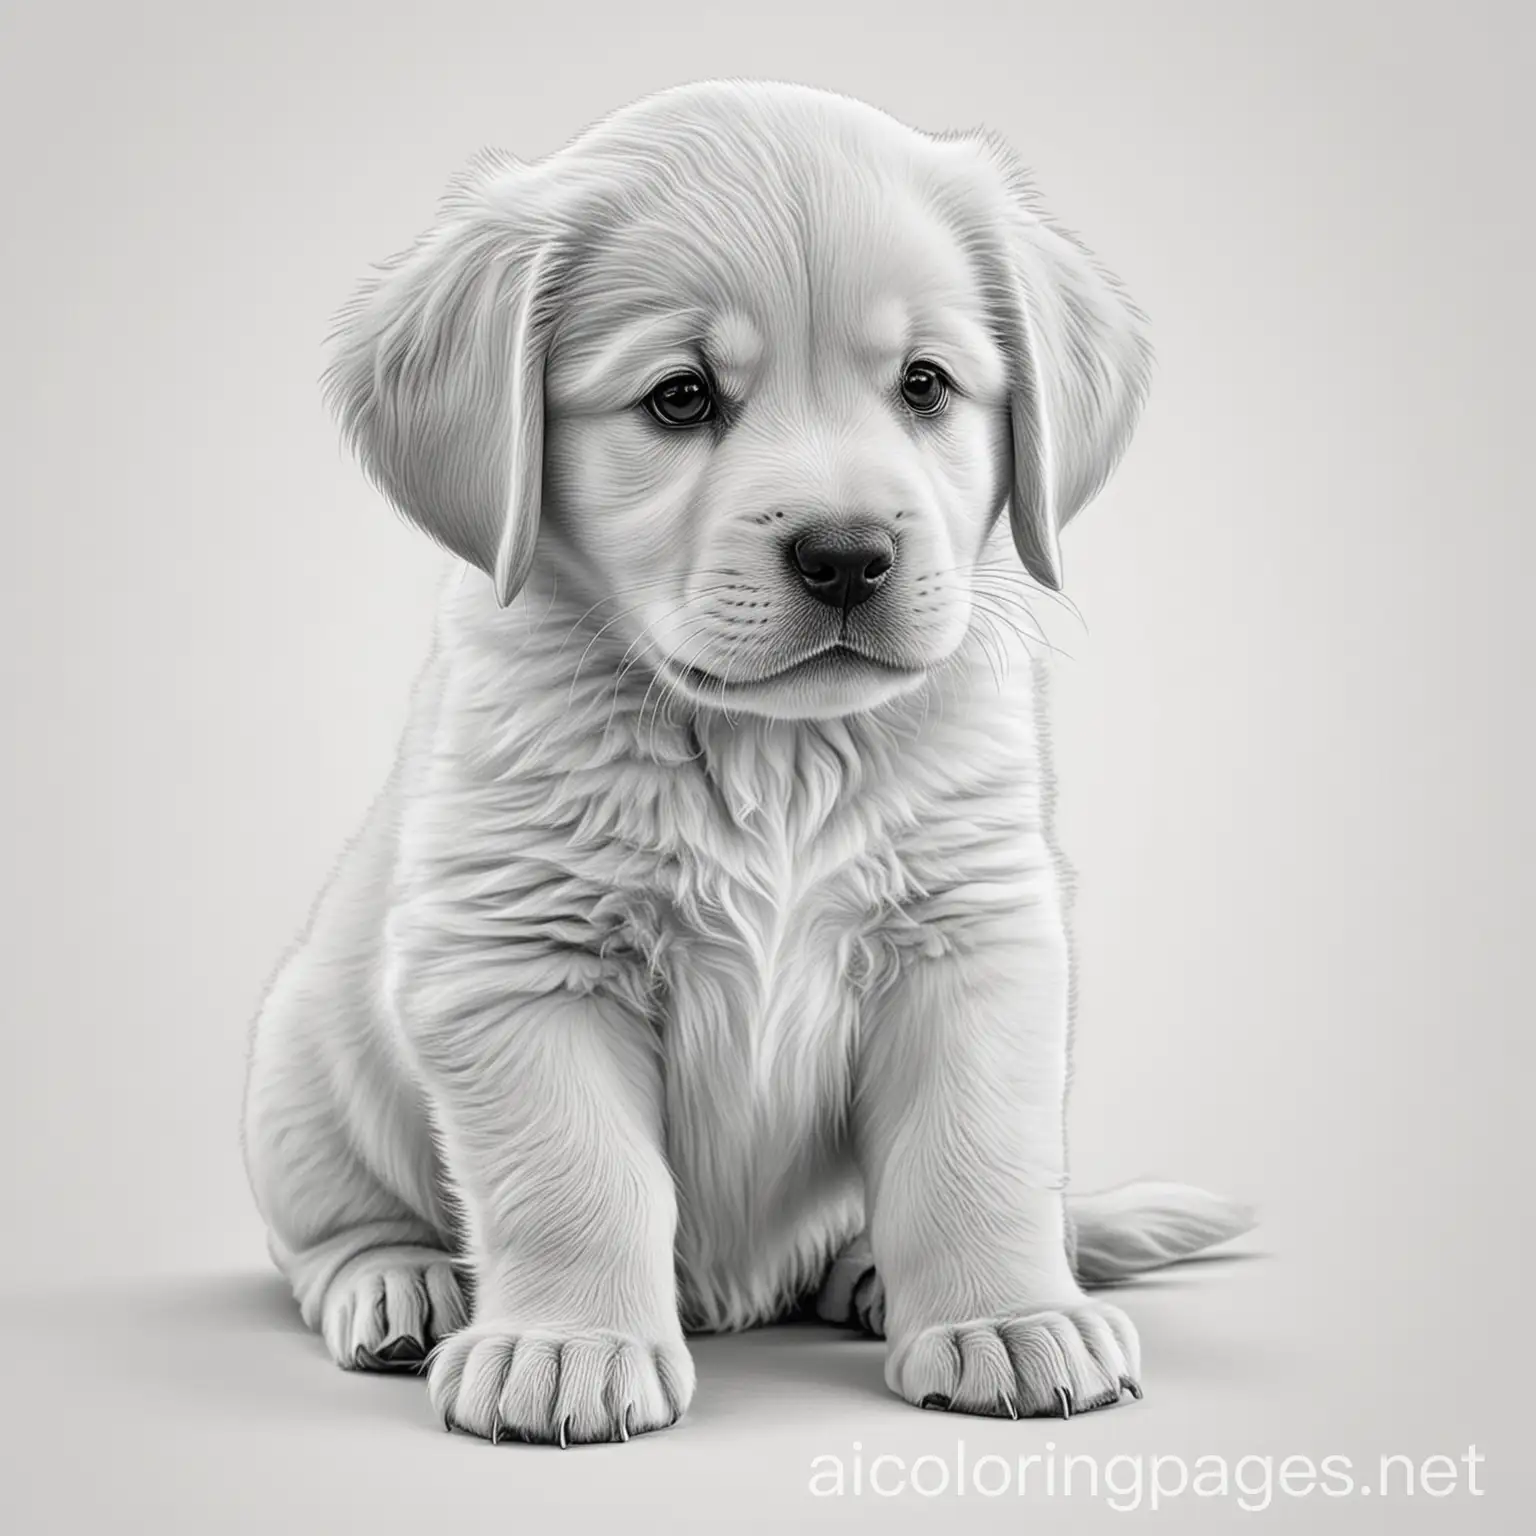 A RED GOLDEN RETREVER PUPPY 
 AS CUTE AS CAN BE COLORING PAGE
, Coloring Page, black and white, line art, white background, Simplicity, Ample White Space. The background of the coloring page is plain white to make it easy for young children to color within the lines. The outlines of all the subjects are easy to distinguish, making it simple for kids to color without too much difficulty